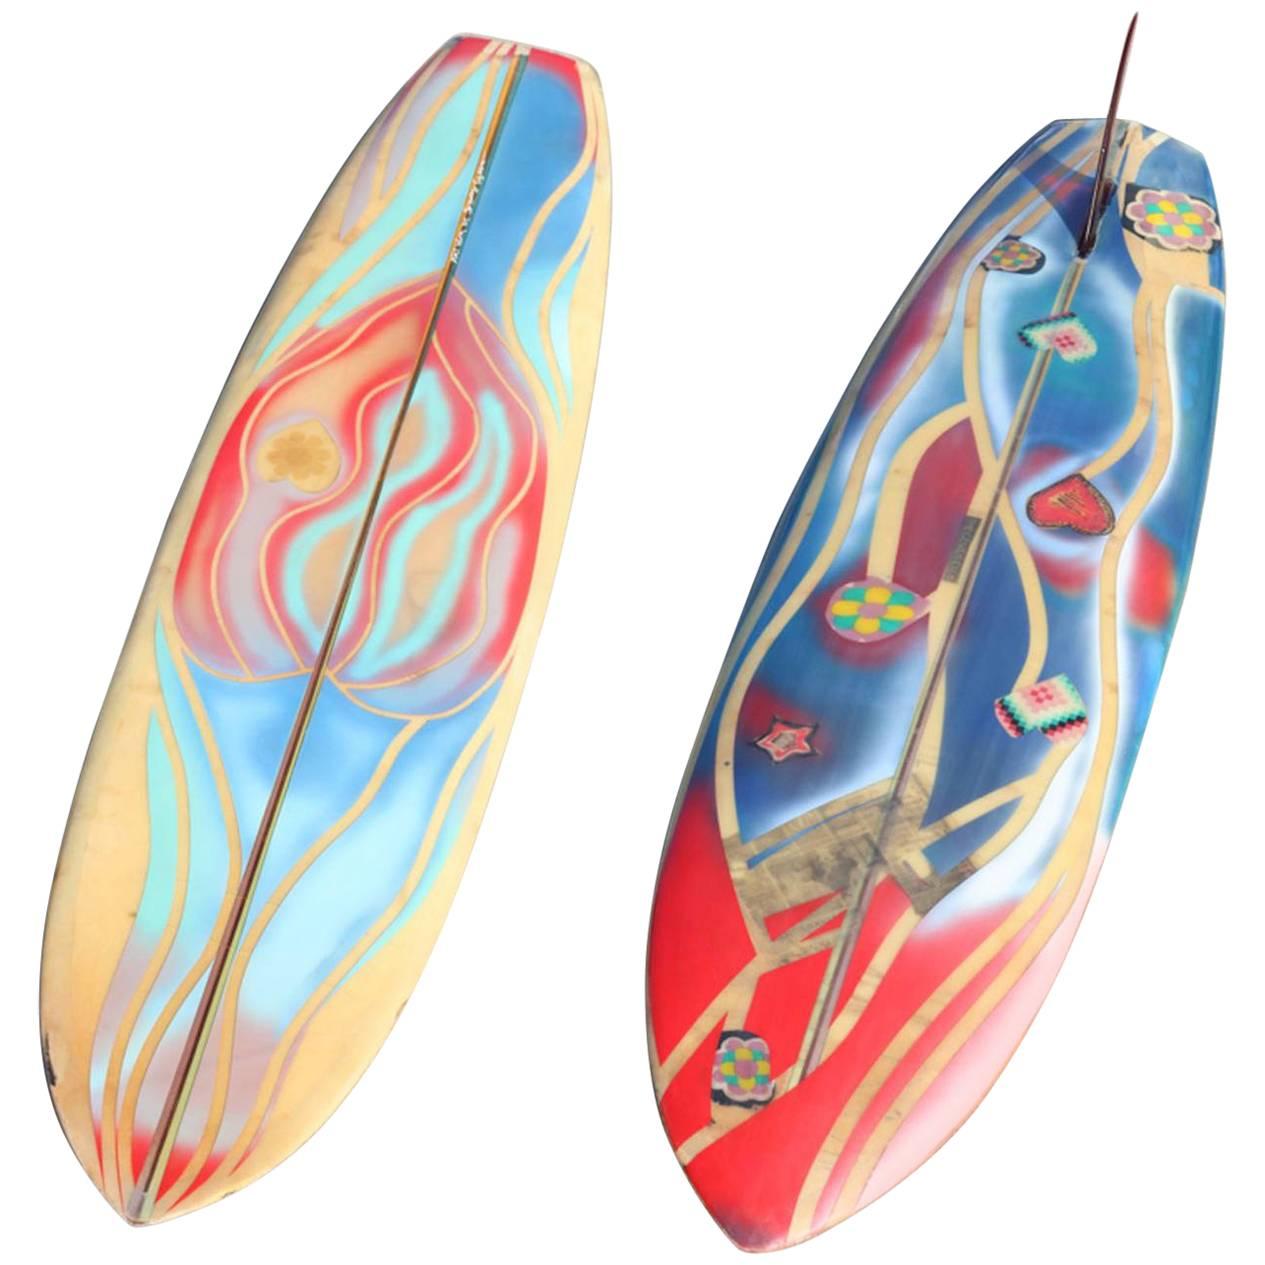 Skip Engblom Surfboard, Two-Sided Art by the Dogtown Z-Boys, Zephyr Founder For Sale